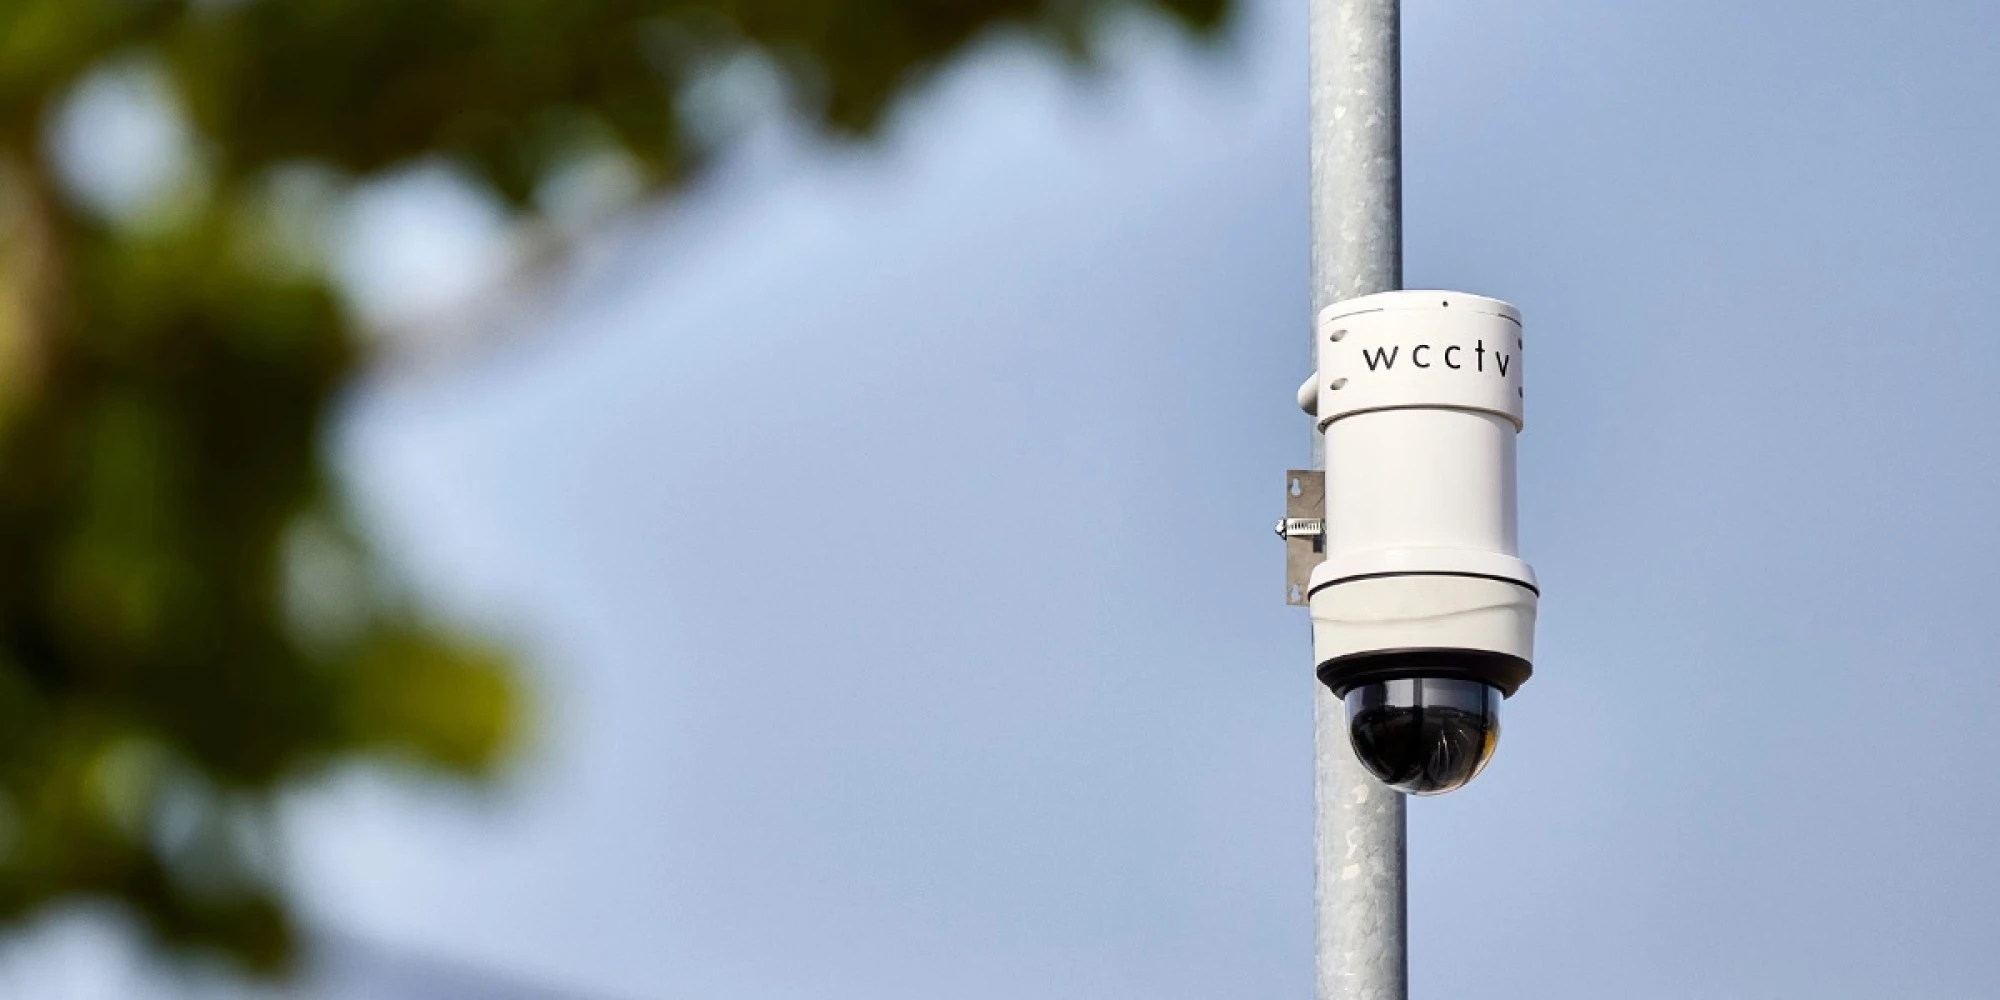 A WCCTV Redeployable CCTV Camera on a Lamppost